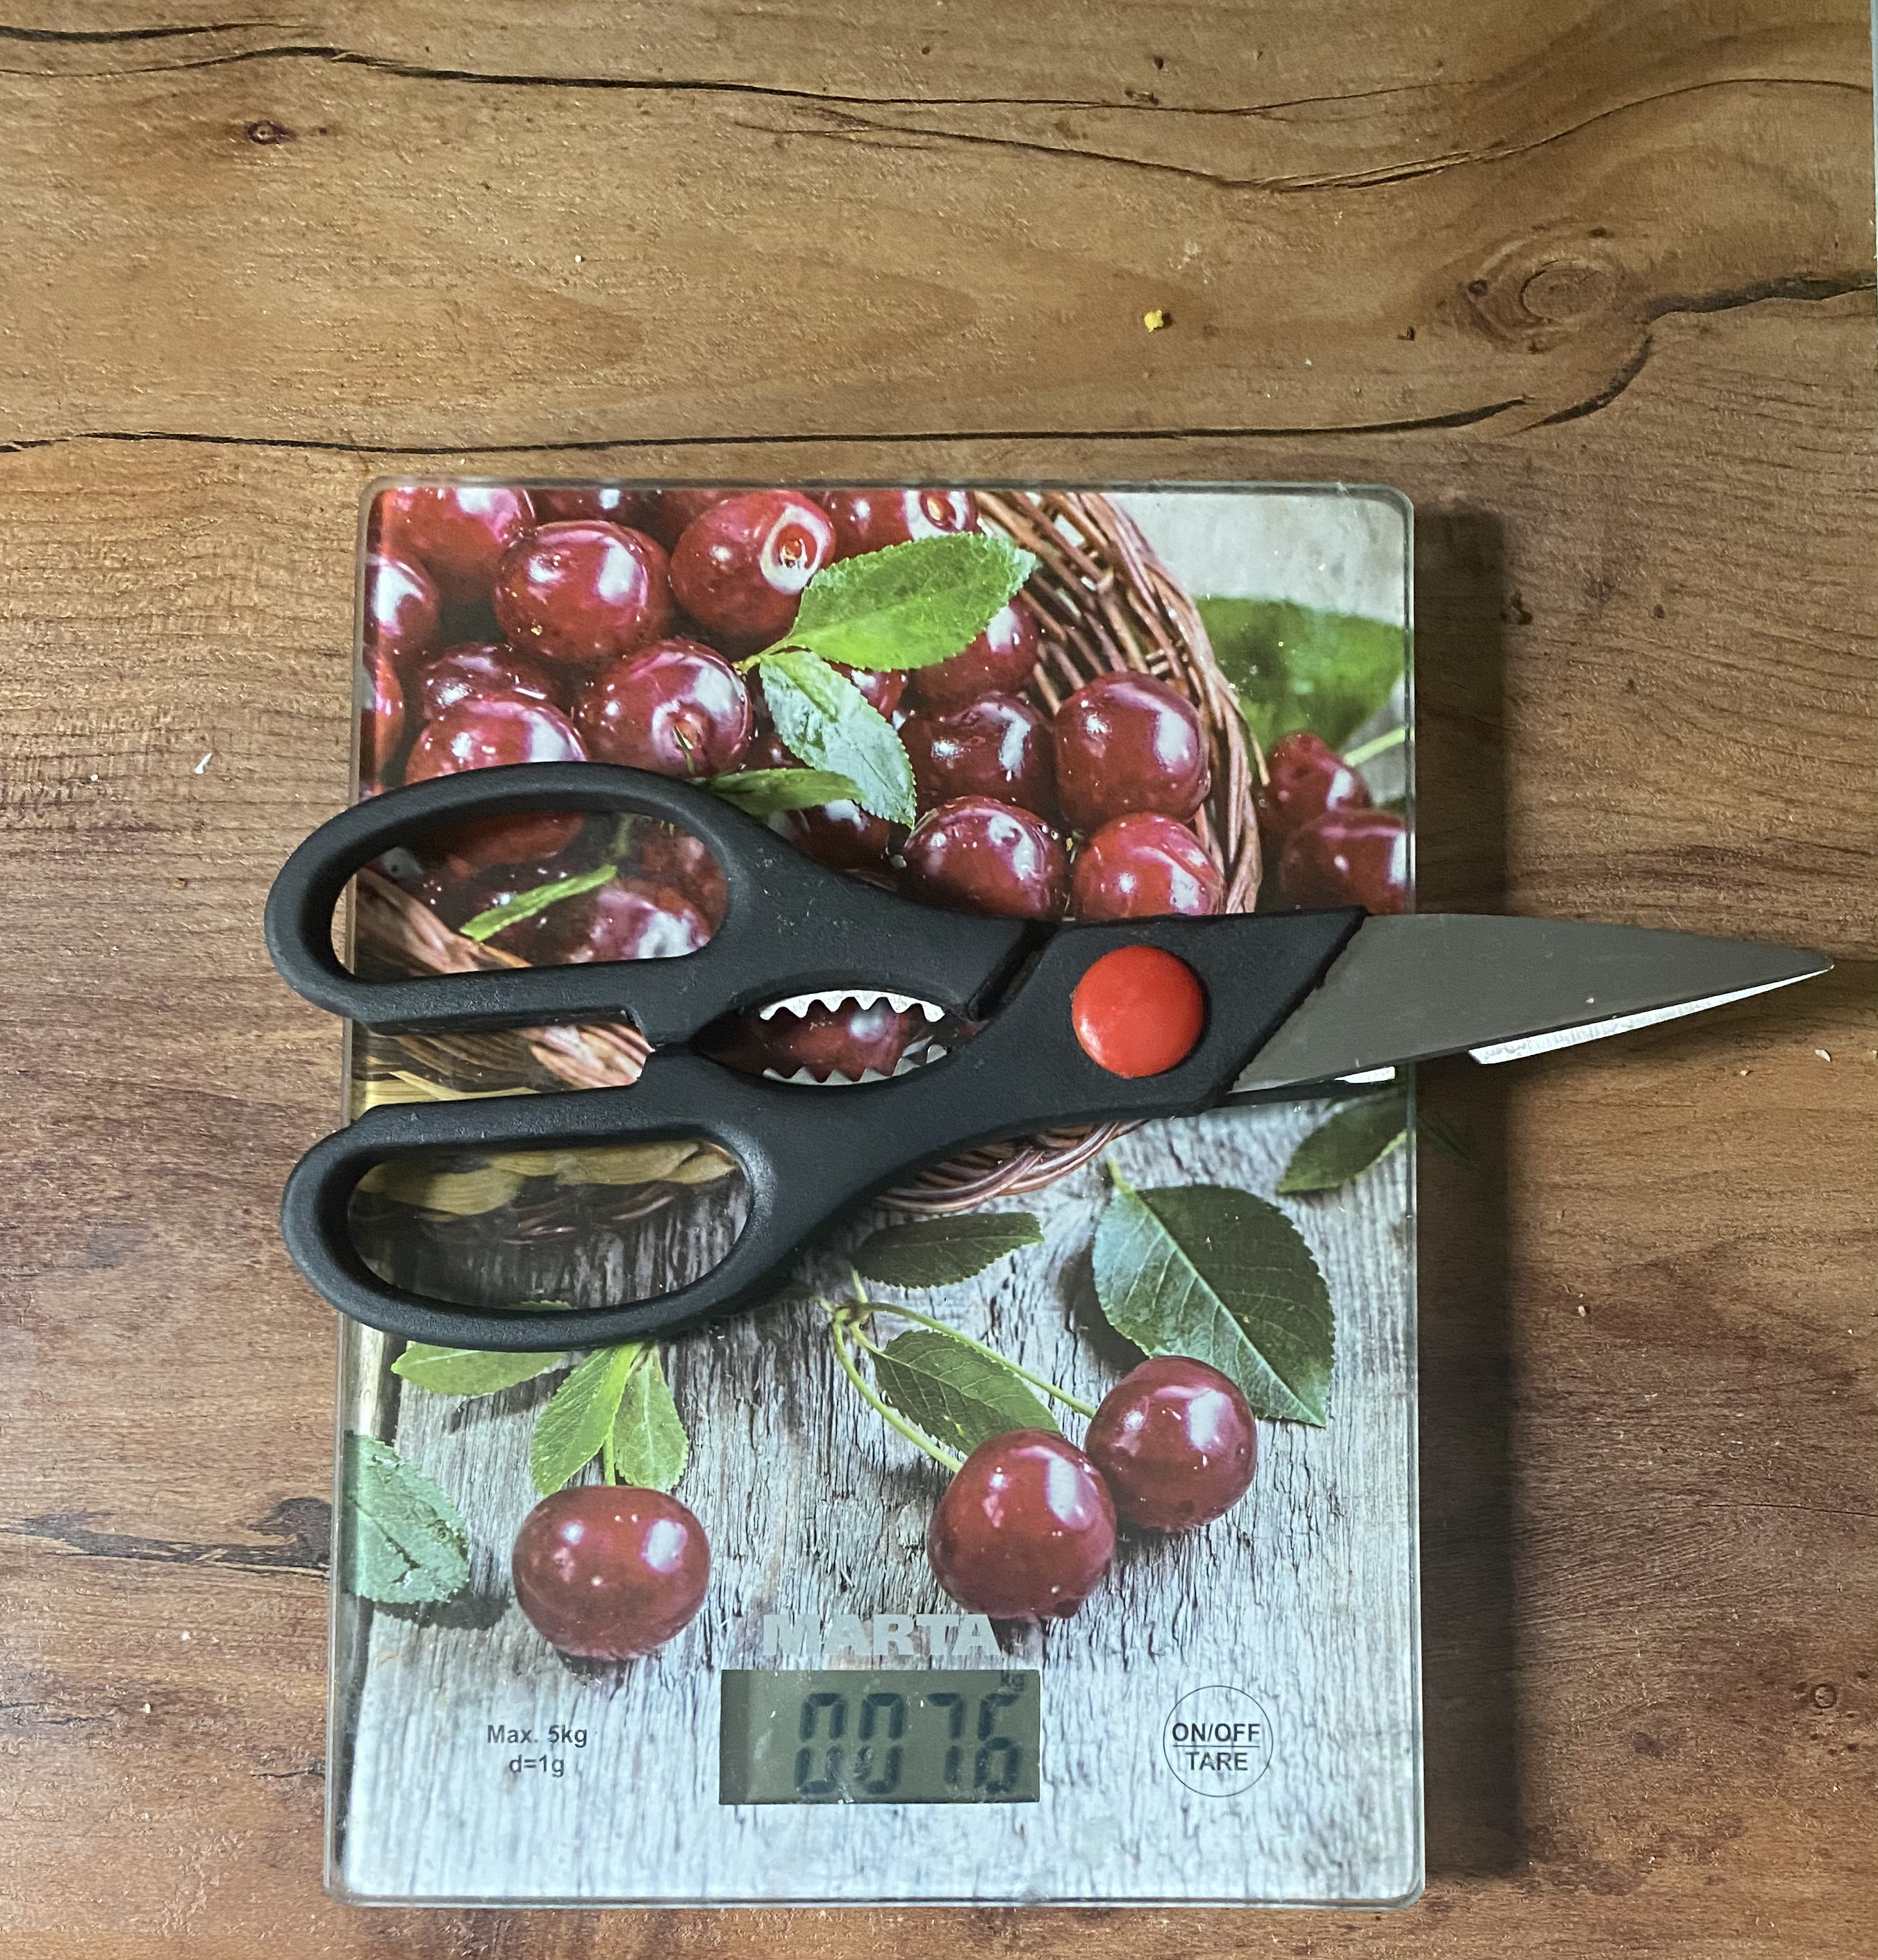 weight of poultry shears